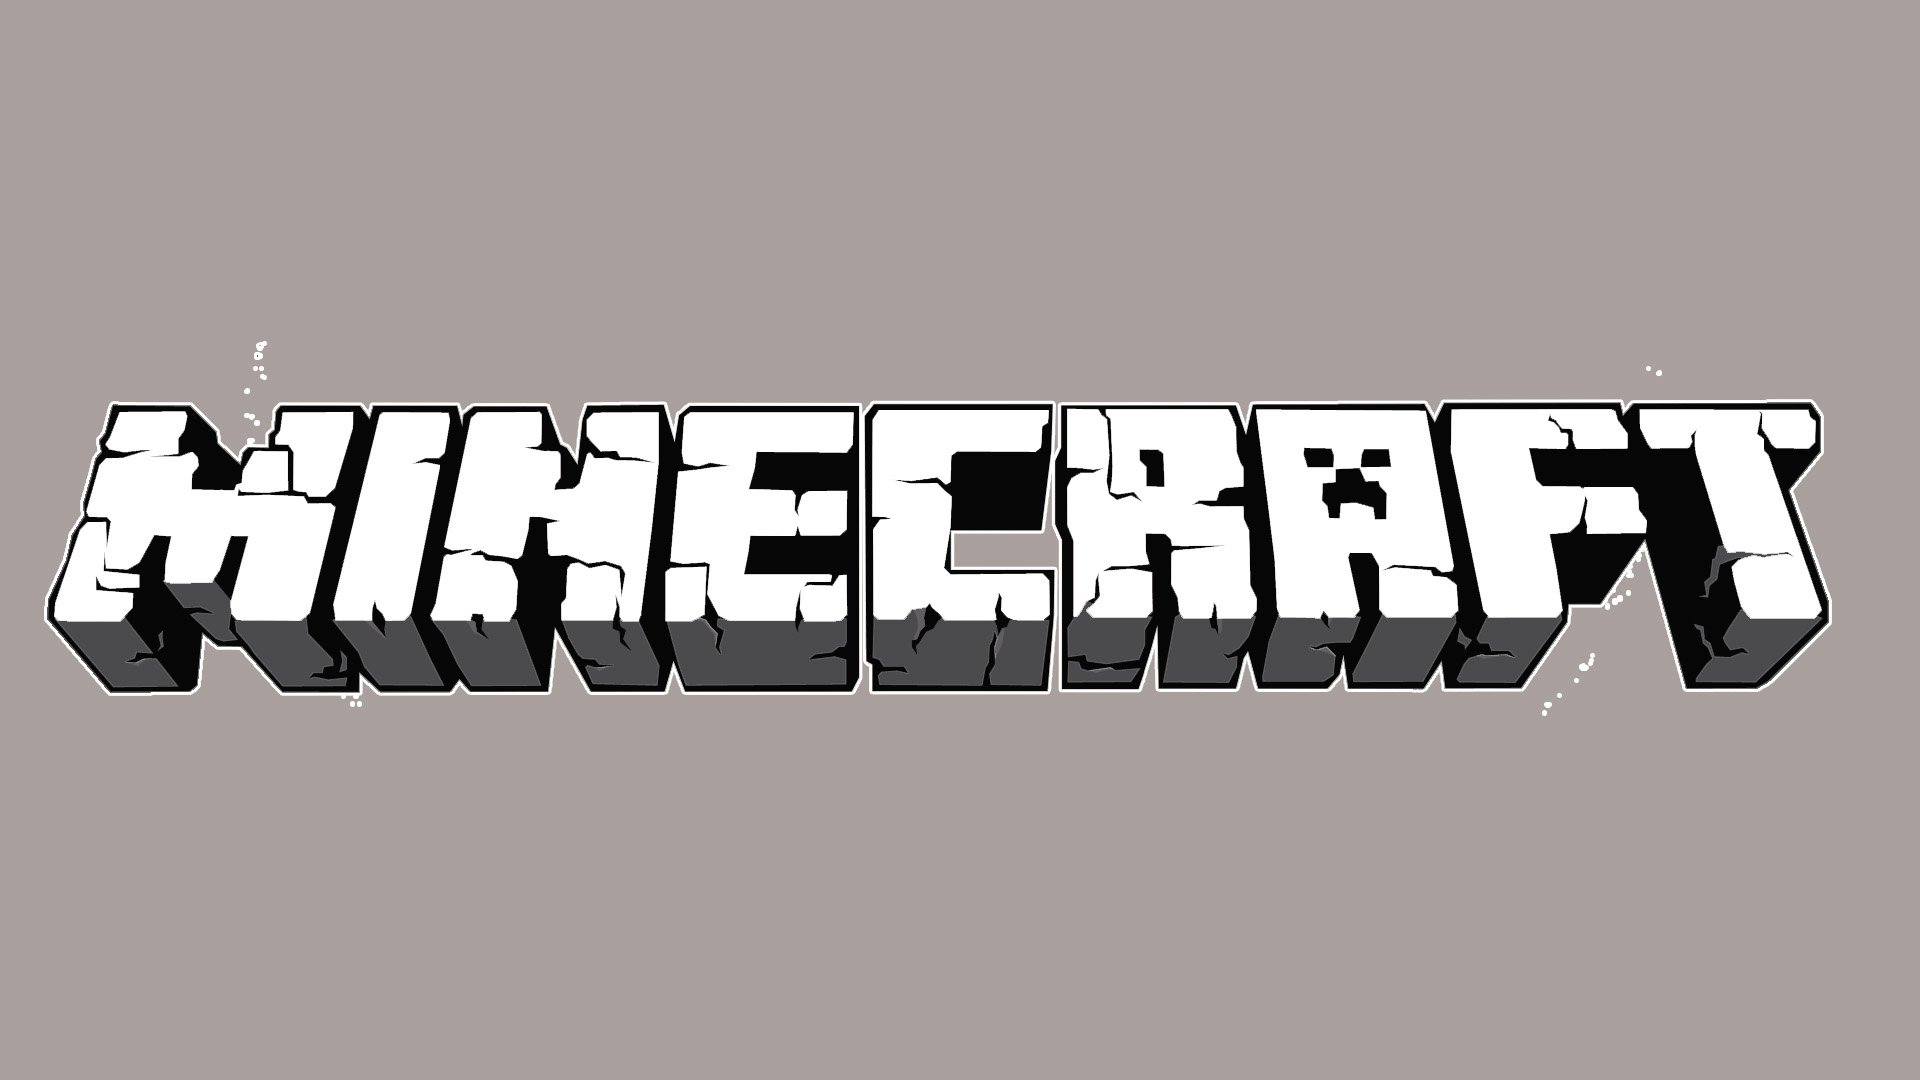 minecraft logo and symbol meaning